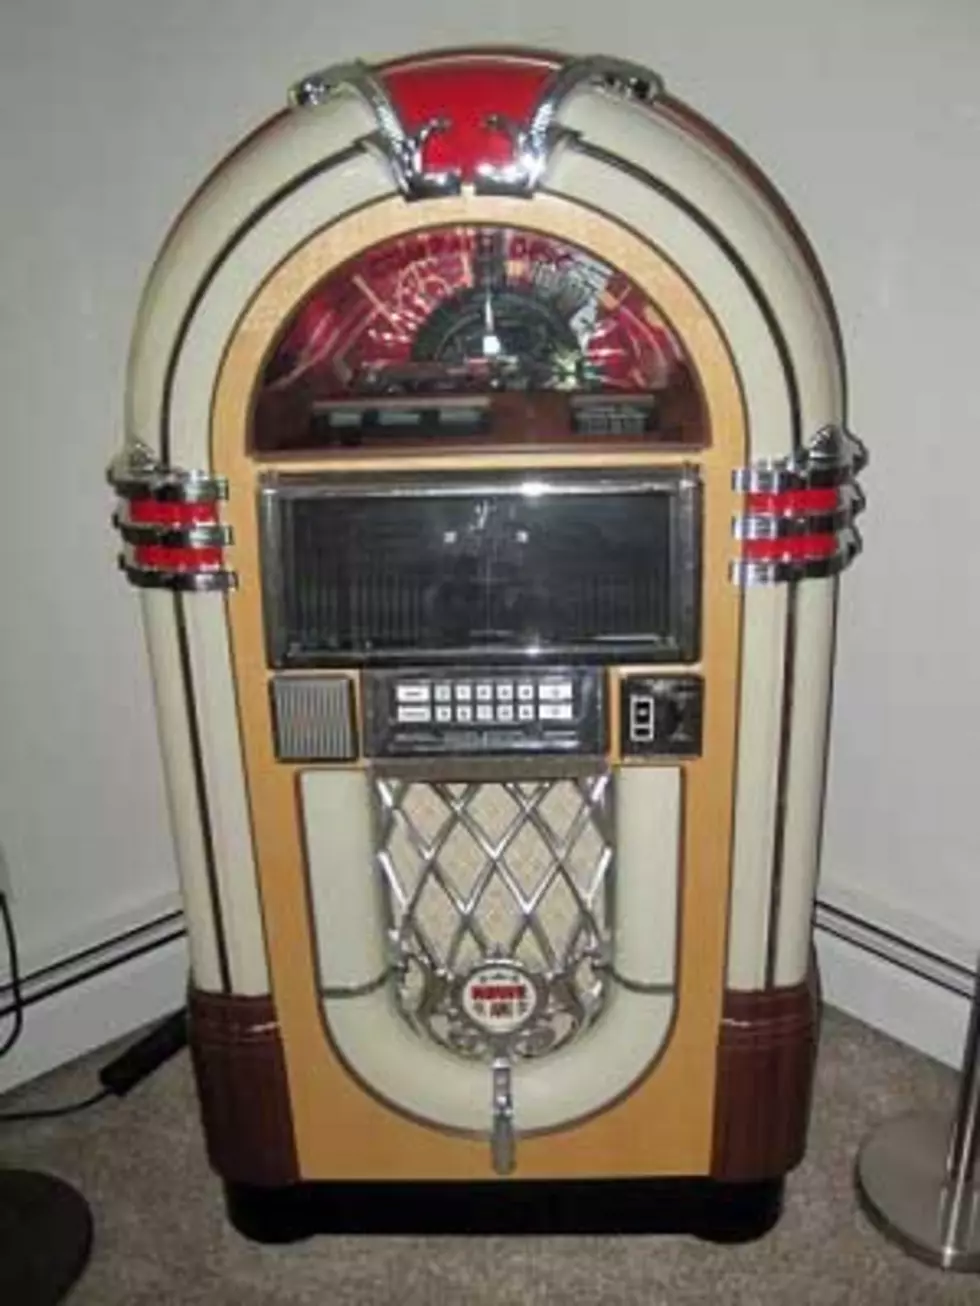 UPDATE: The Last Jukebox Made in Grand Rapids has been Located!